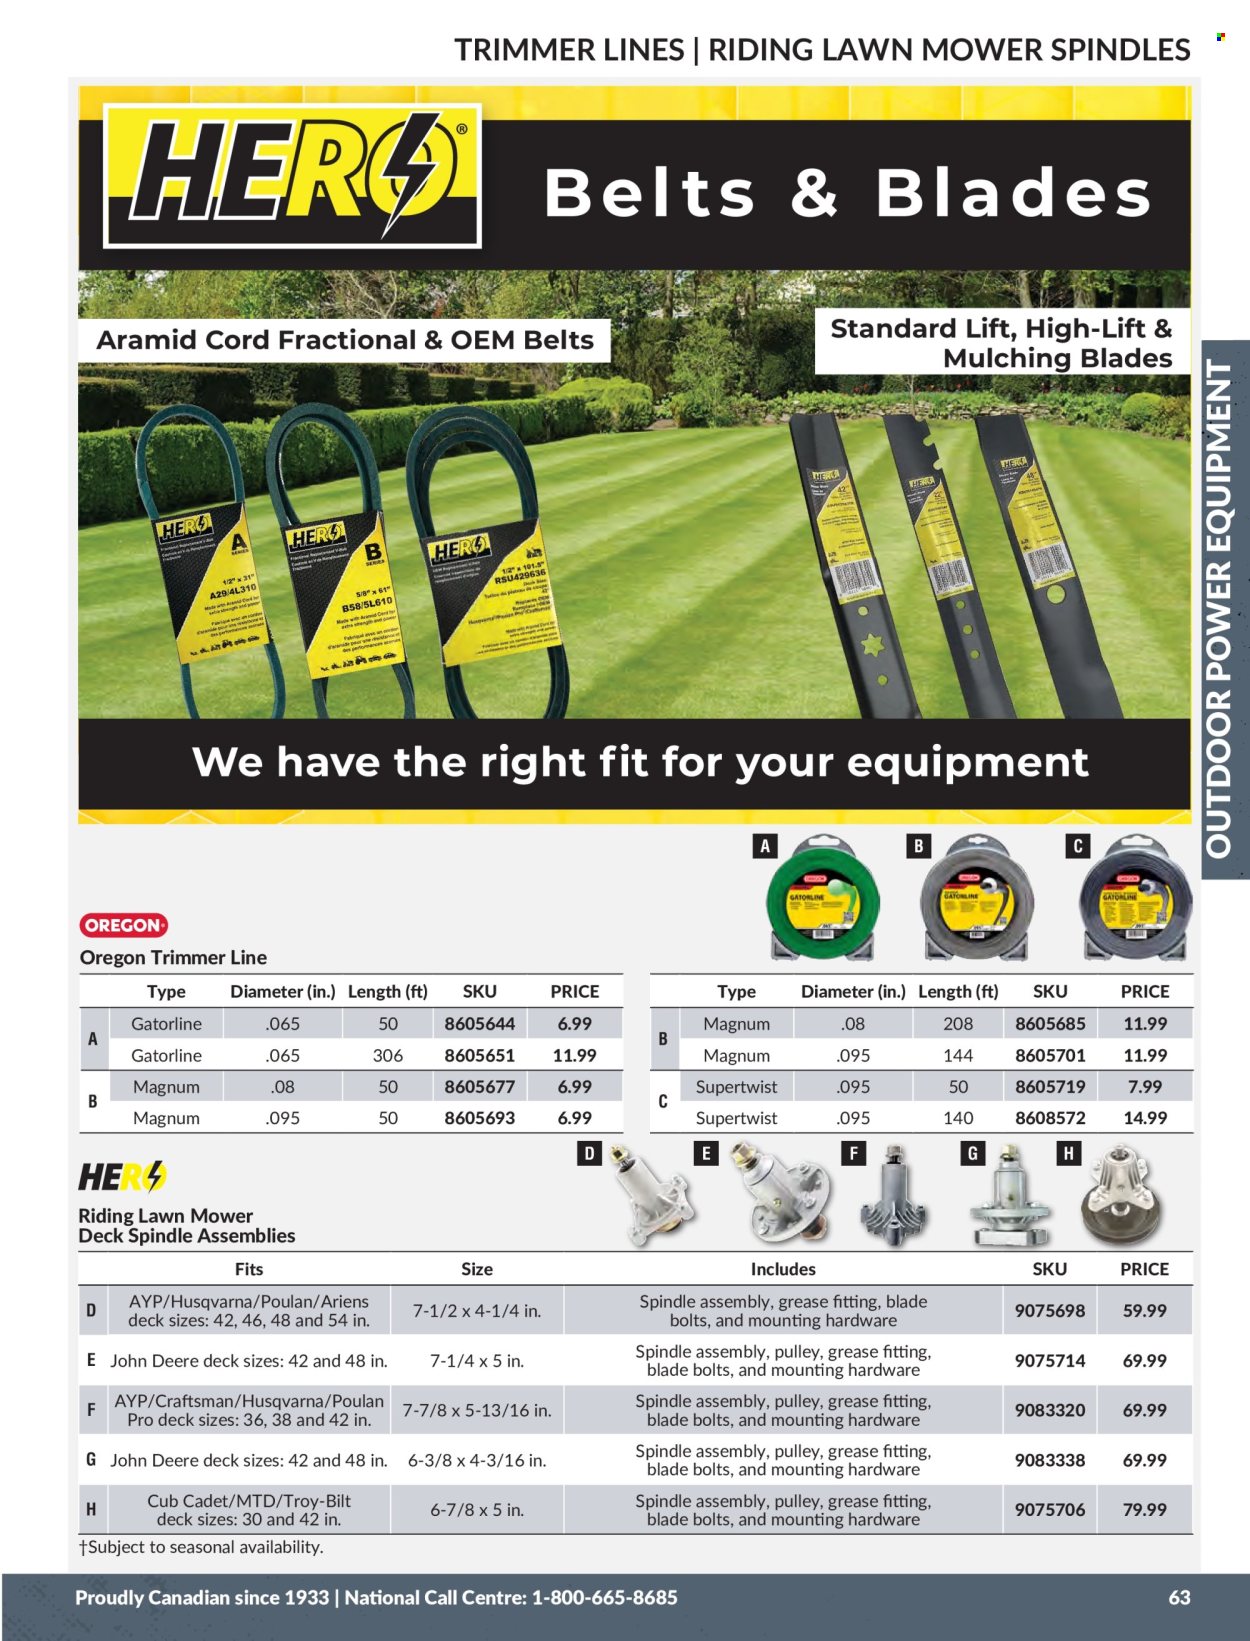 thumbnail - Princess Auto Flyer - Sales products - John Deere, bolt, Craftsman, Husqvarna, string trimmer, lawn mower, trimmer line. Page 65.